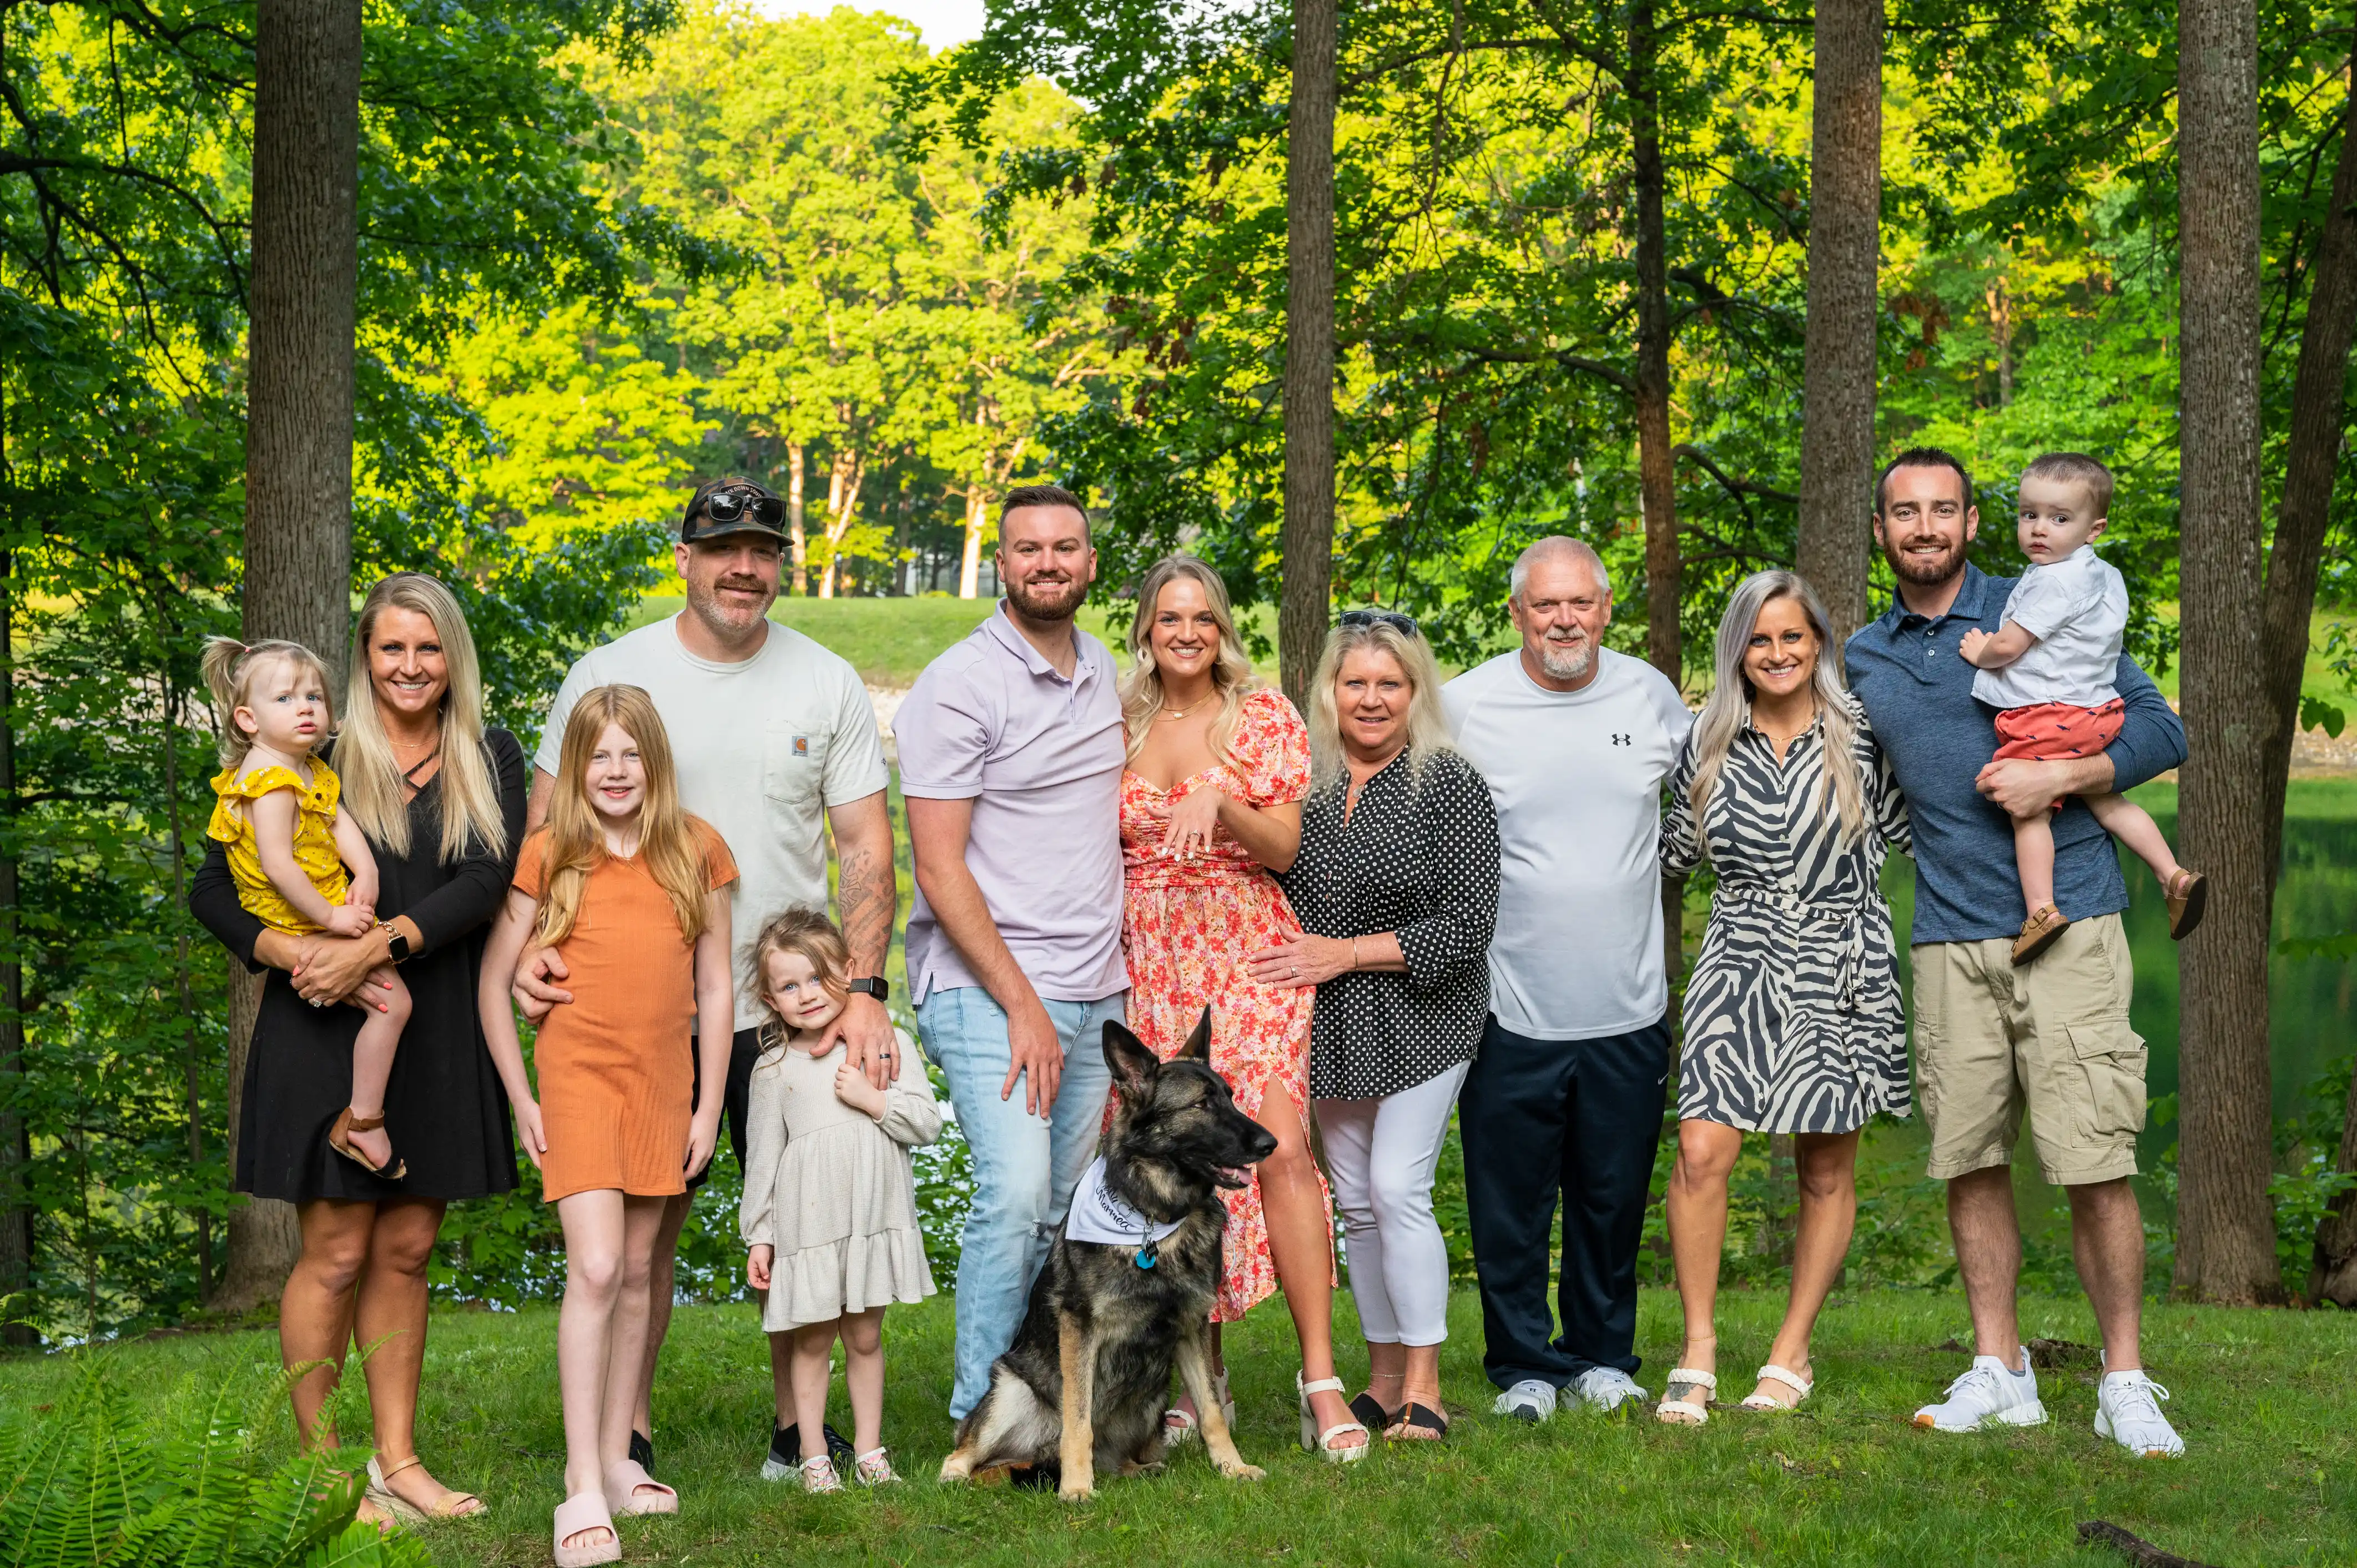 A happy family with multiple generations smiles for a photo outdoors, with trees in the background. A dog is also included in the family portrait.